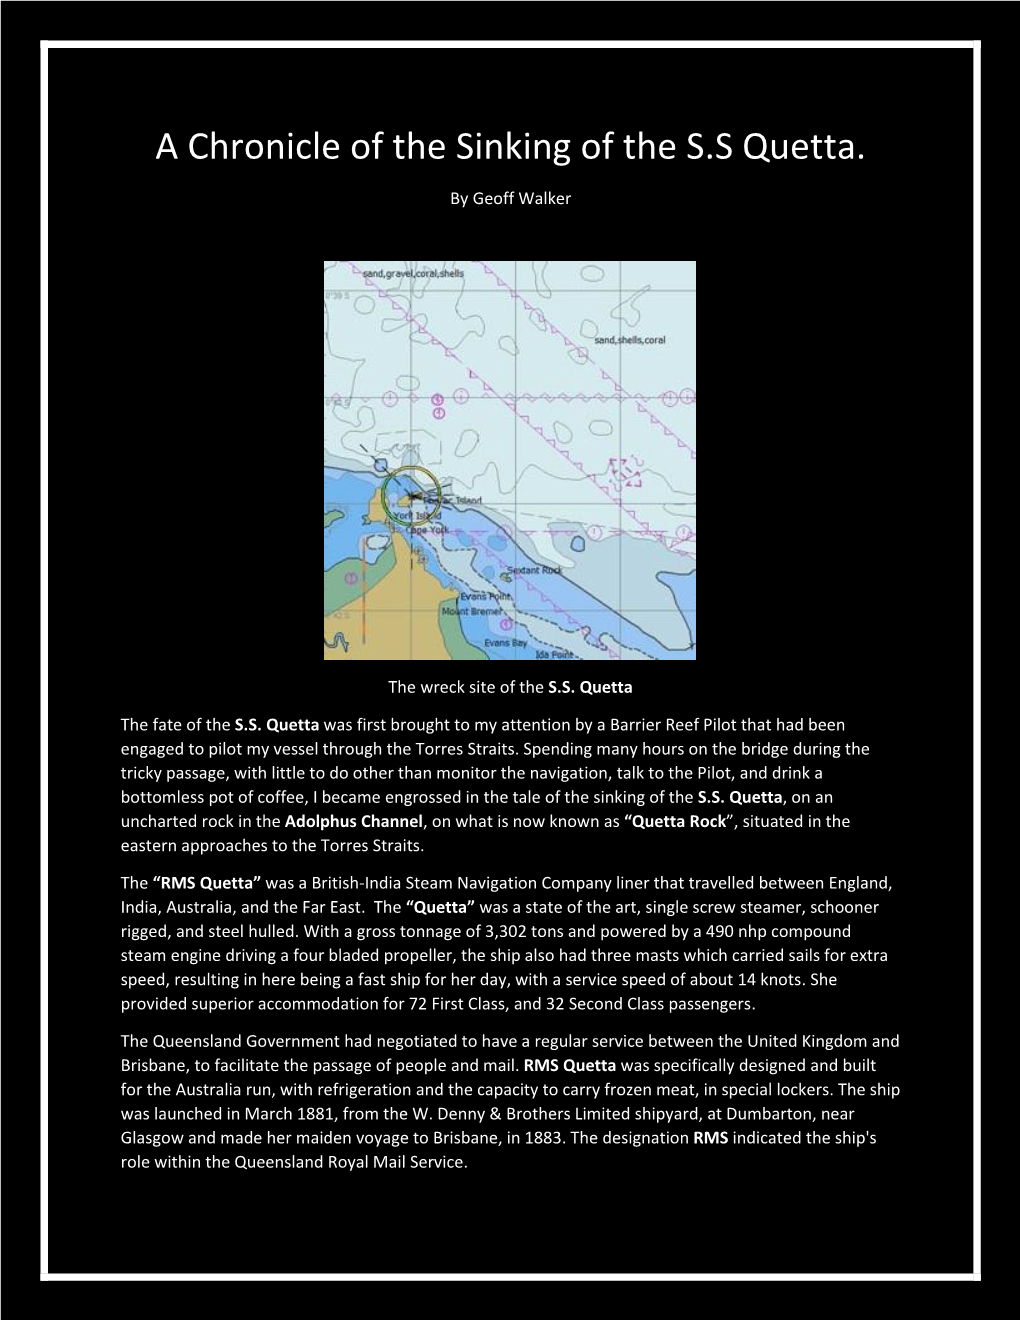 A Chronicle of the Sinking of the S.S Quetta